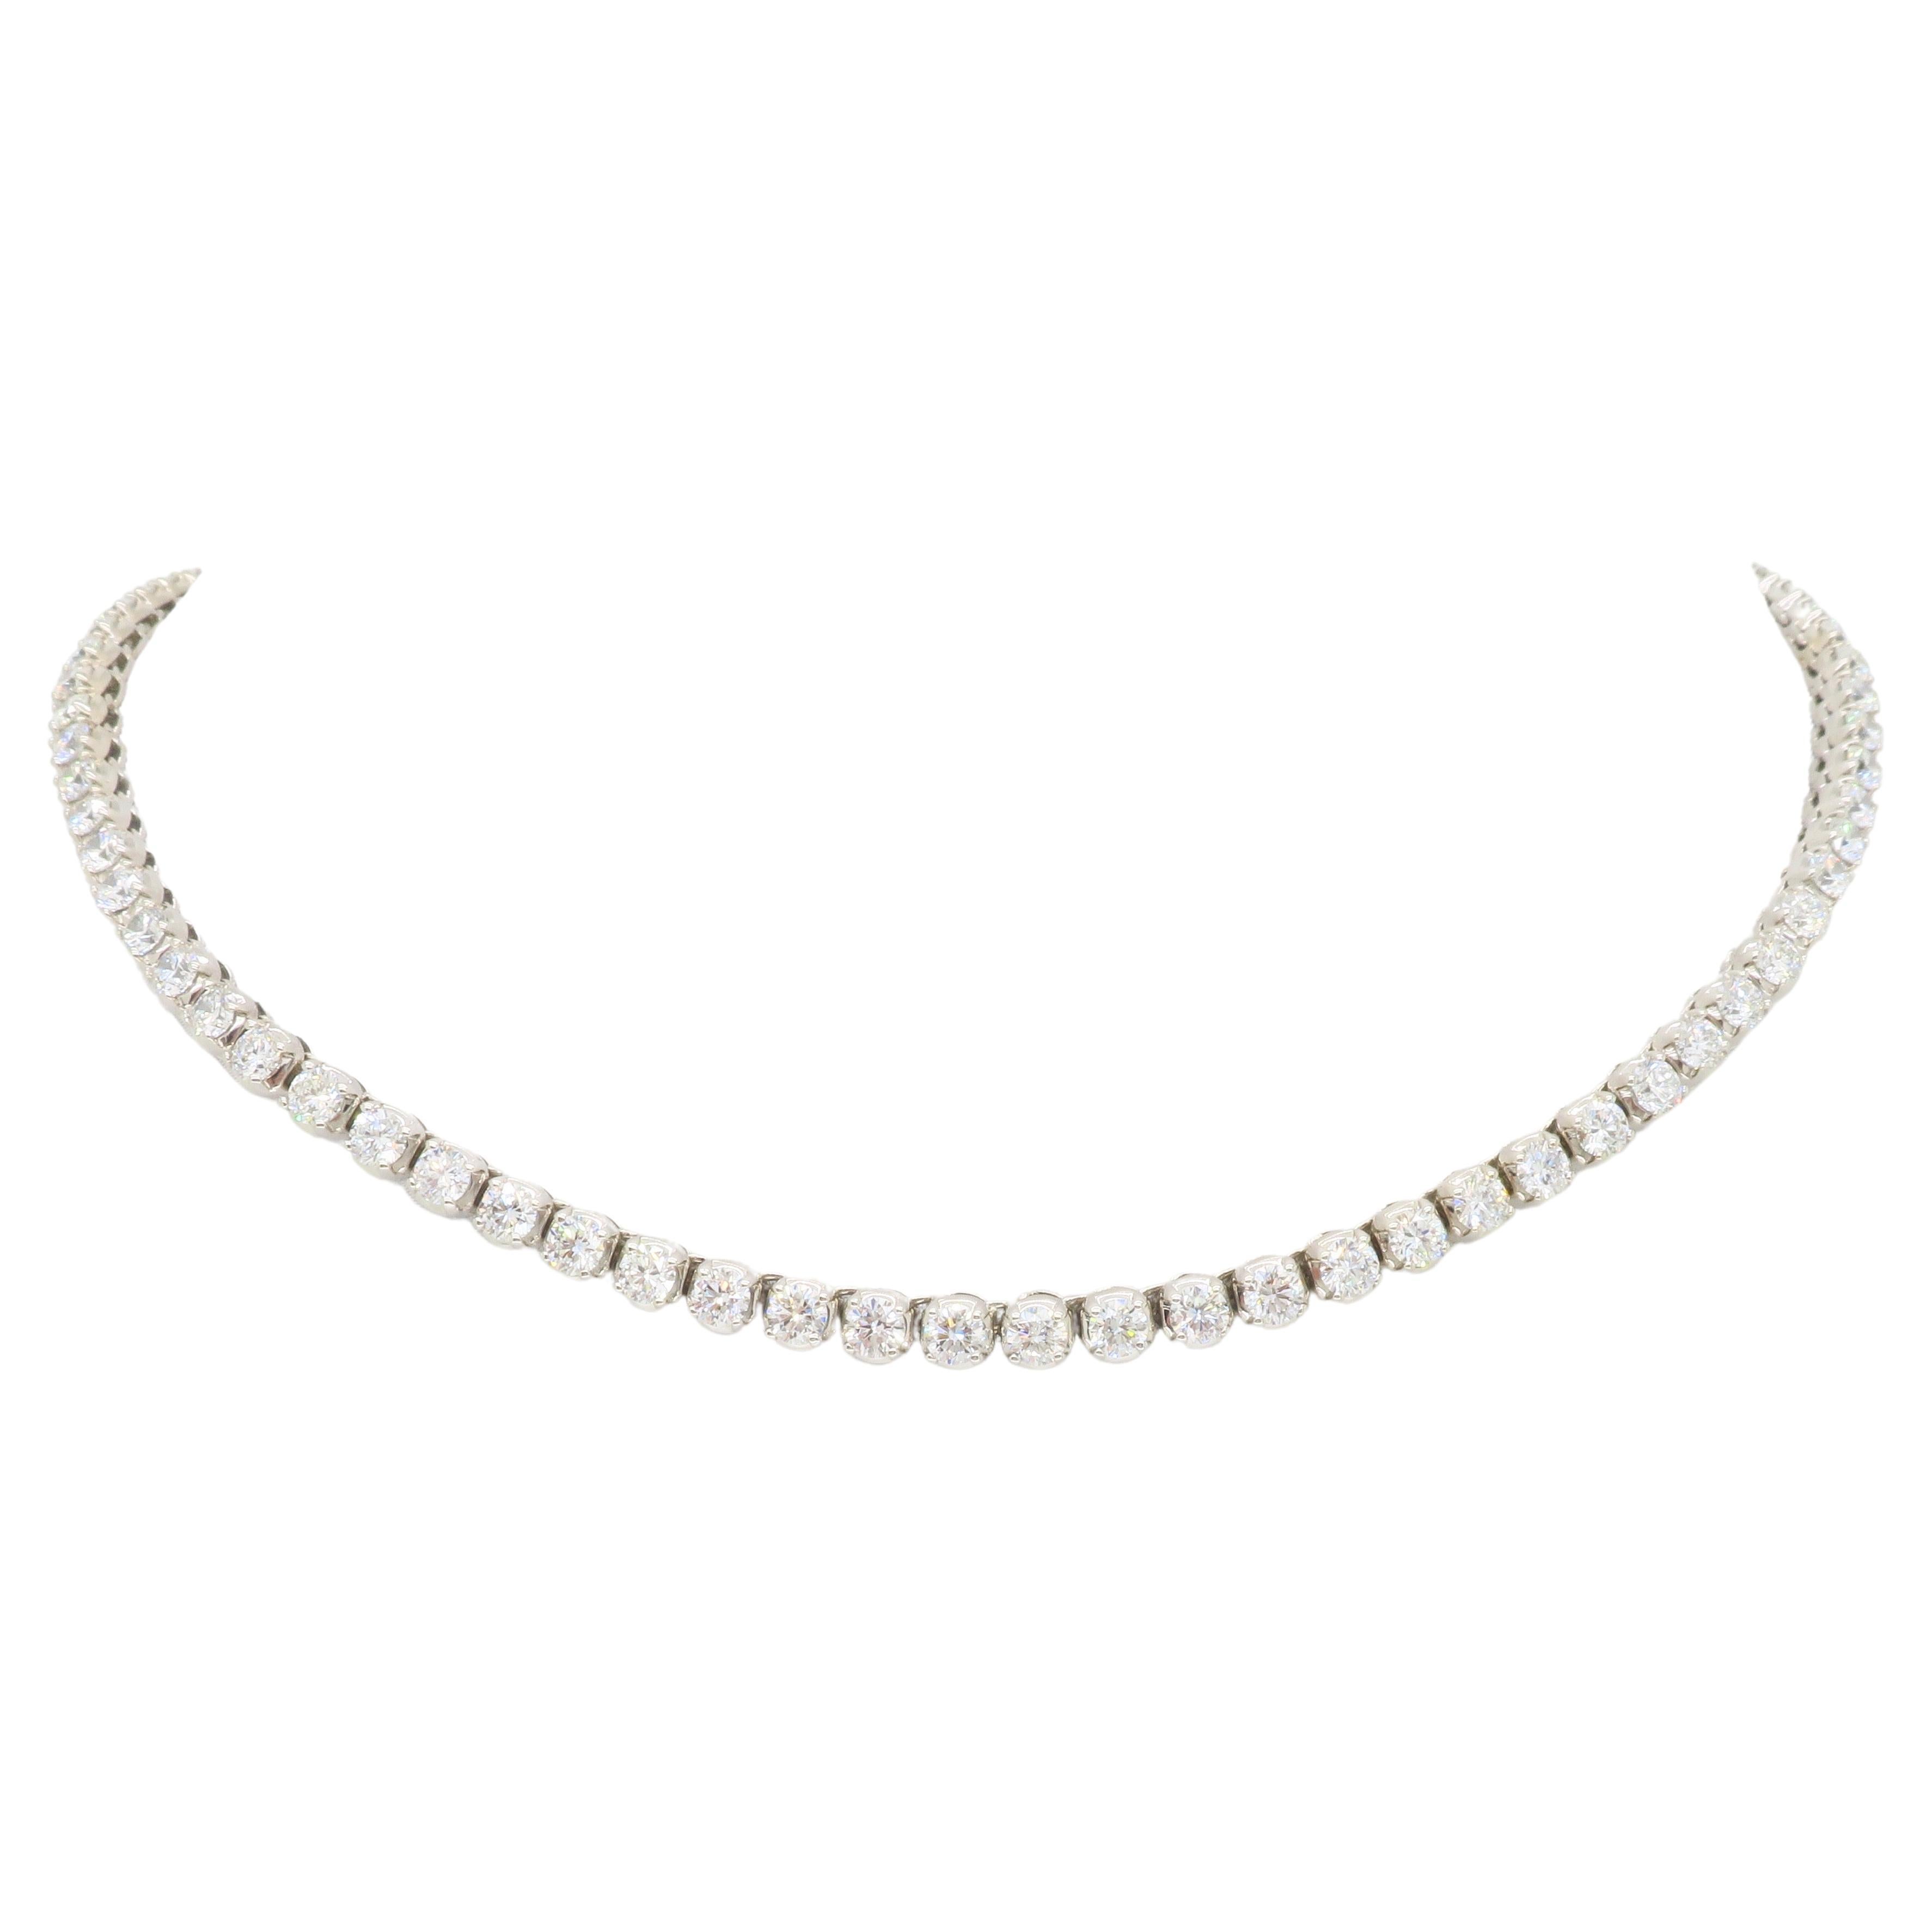 15.00CTW Diamond Tennis Necklace Made in 14k White Gold